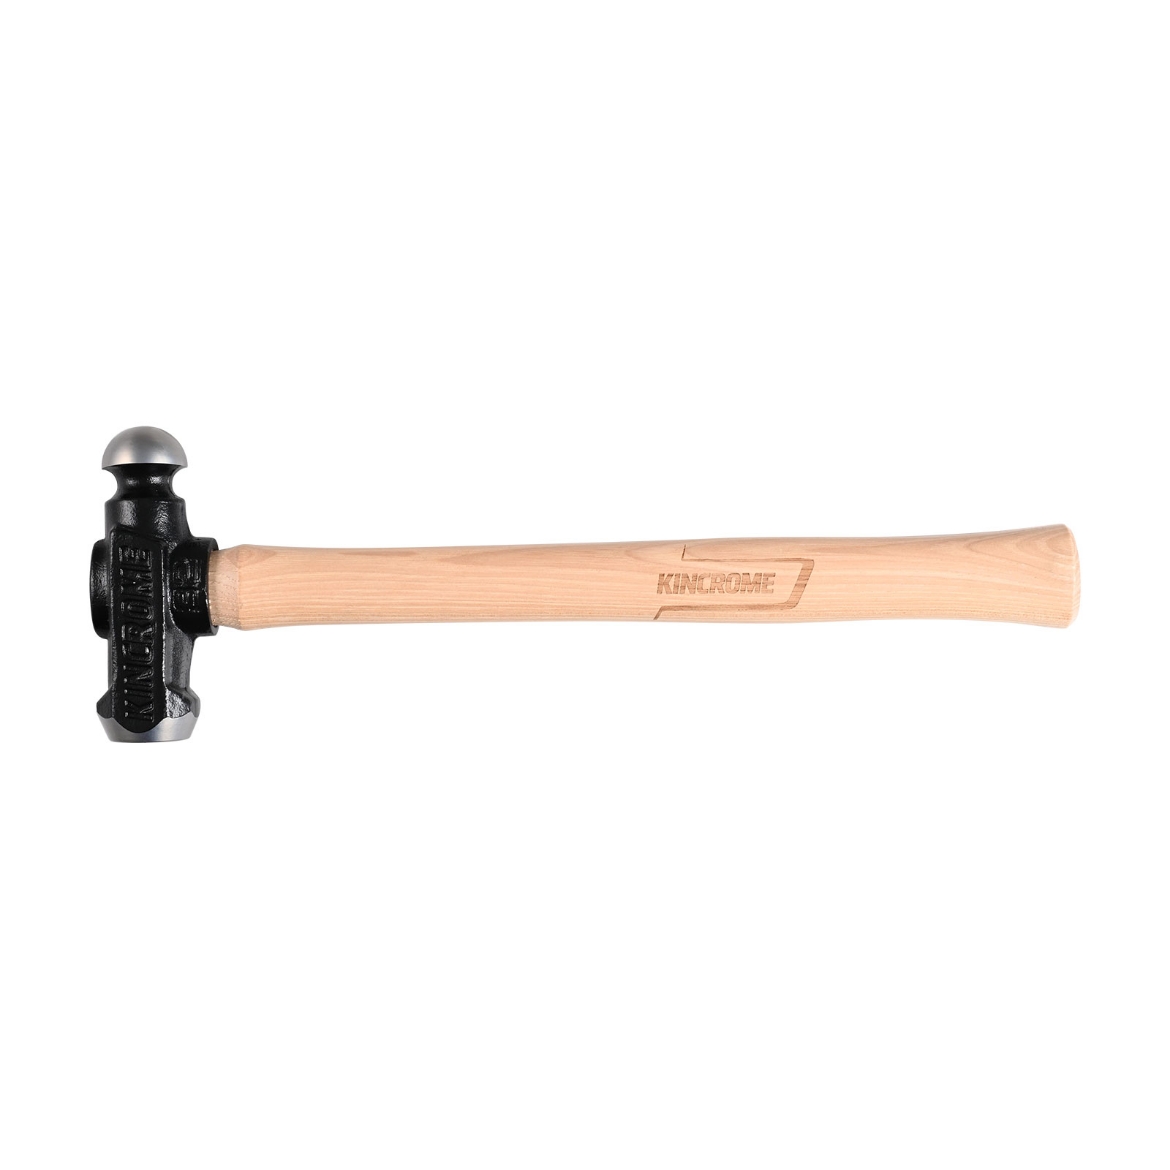 Picture of Ball Pein Hammer 32oz (900g) - Hickory